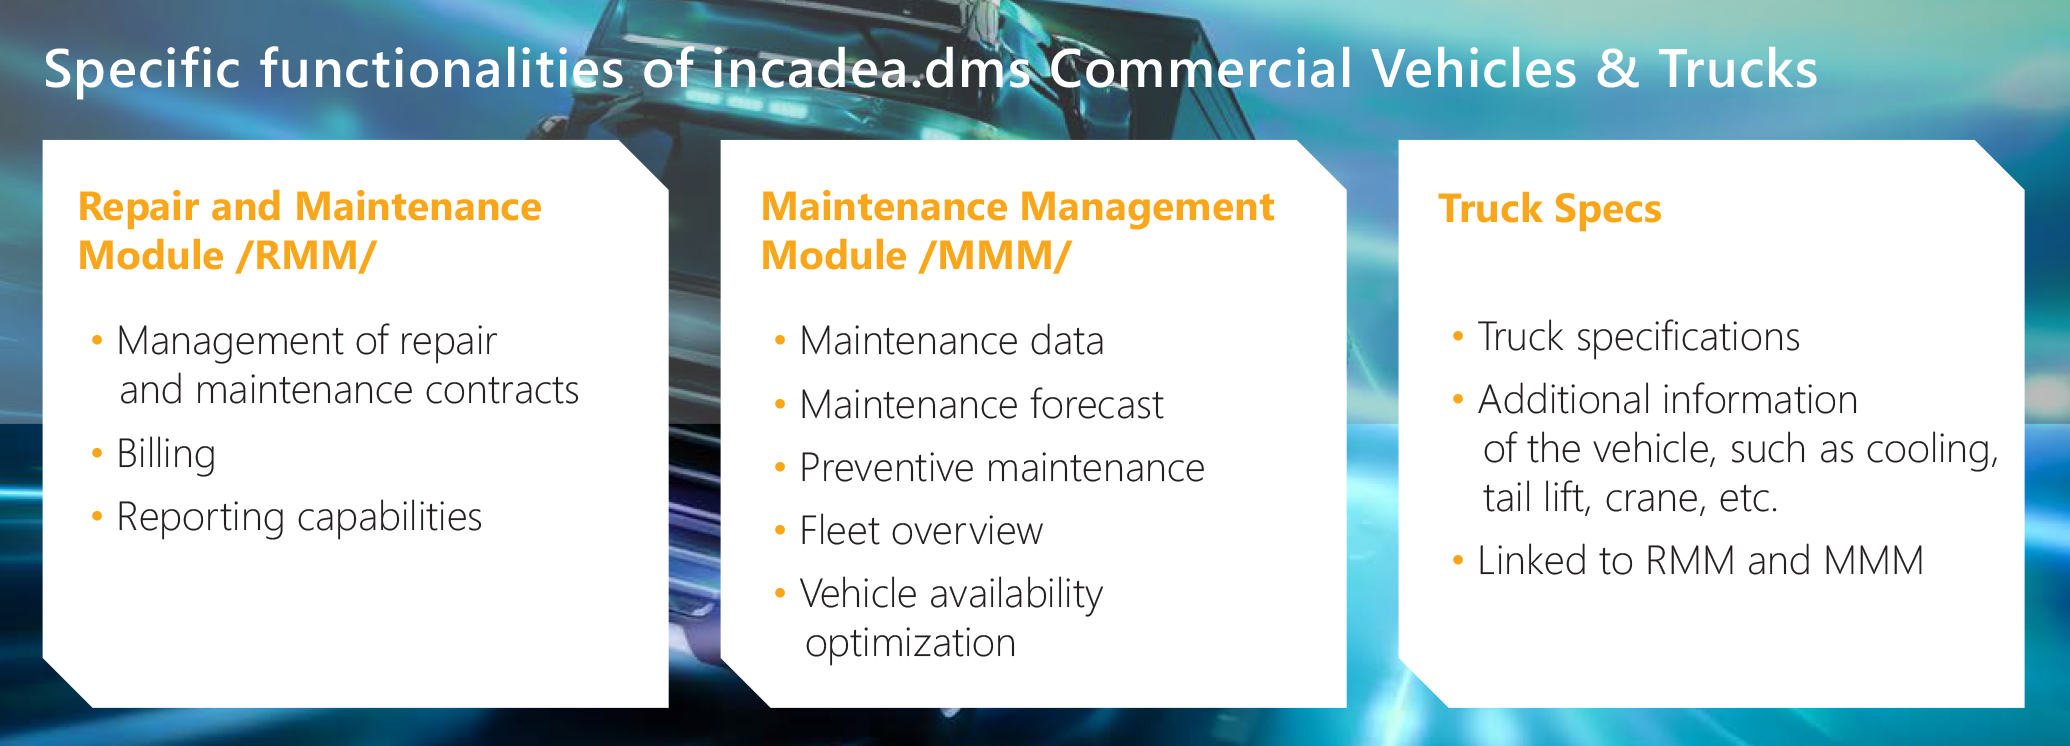 Specific functionalities of incadea,dms Commercial Vehicles and Trucks